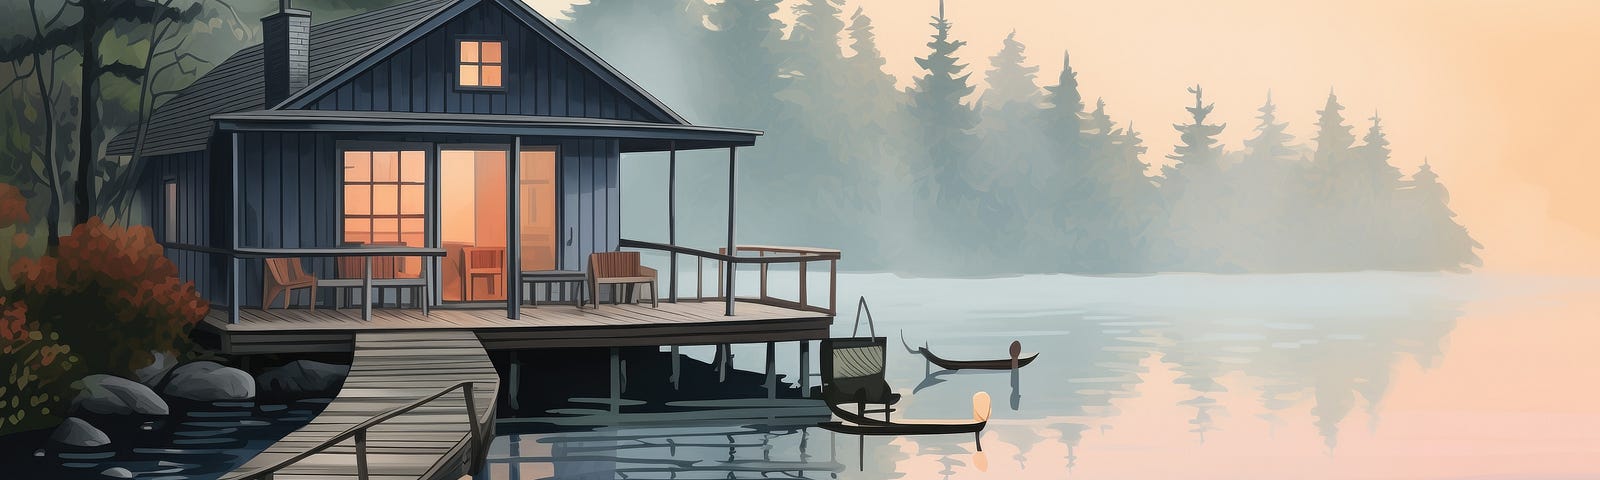 A misty morning cabin on a lake front